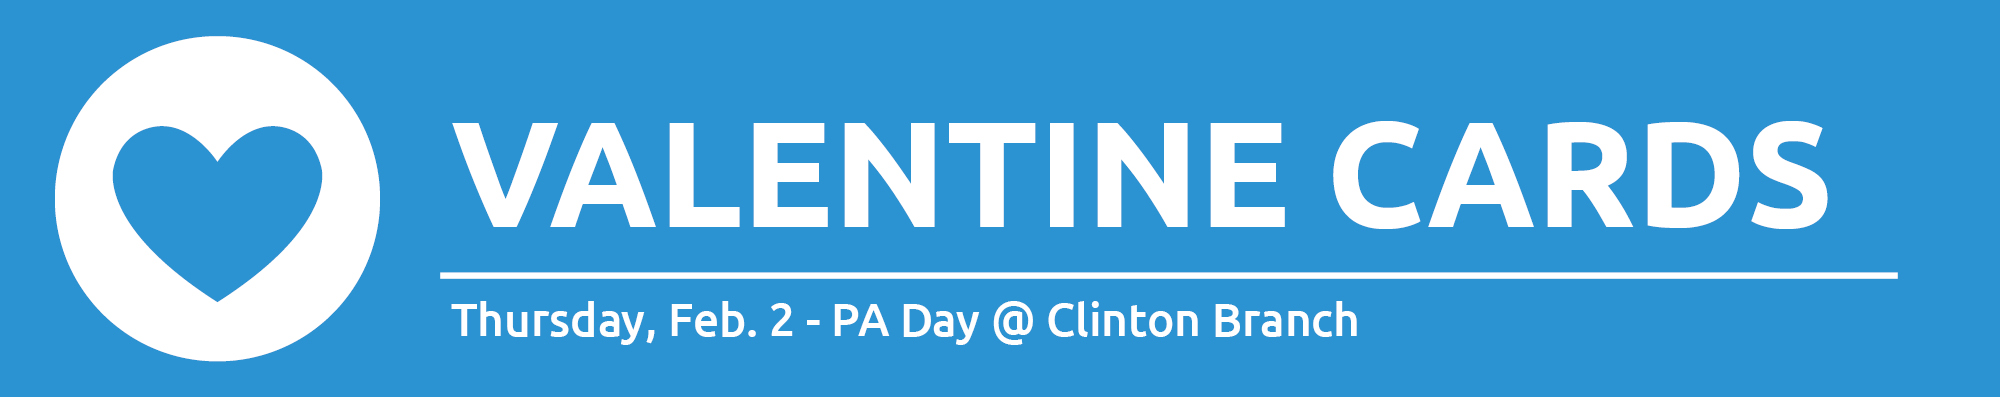 Illustration of a heart with text promoting PA Day Valentine Card making at Clinton Branch